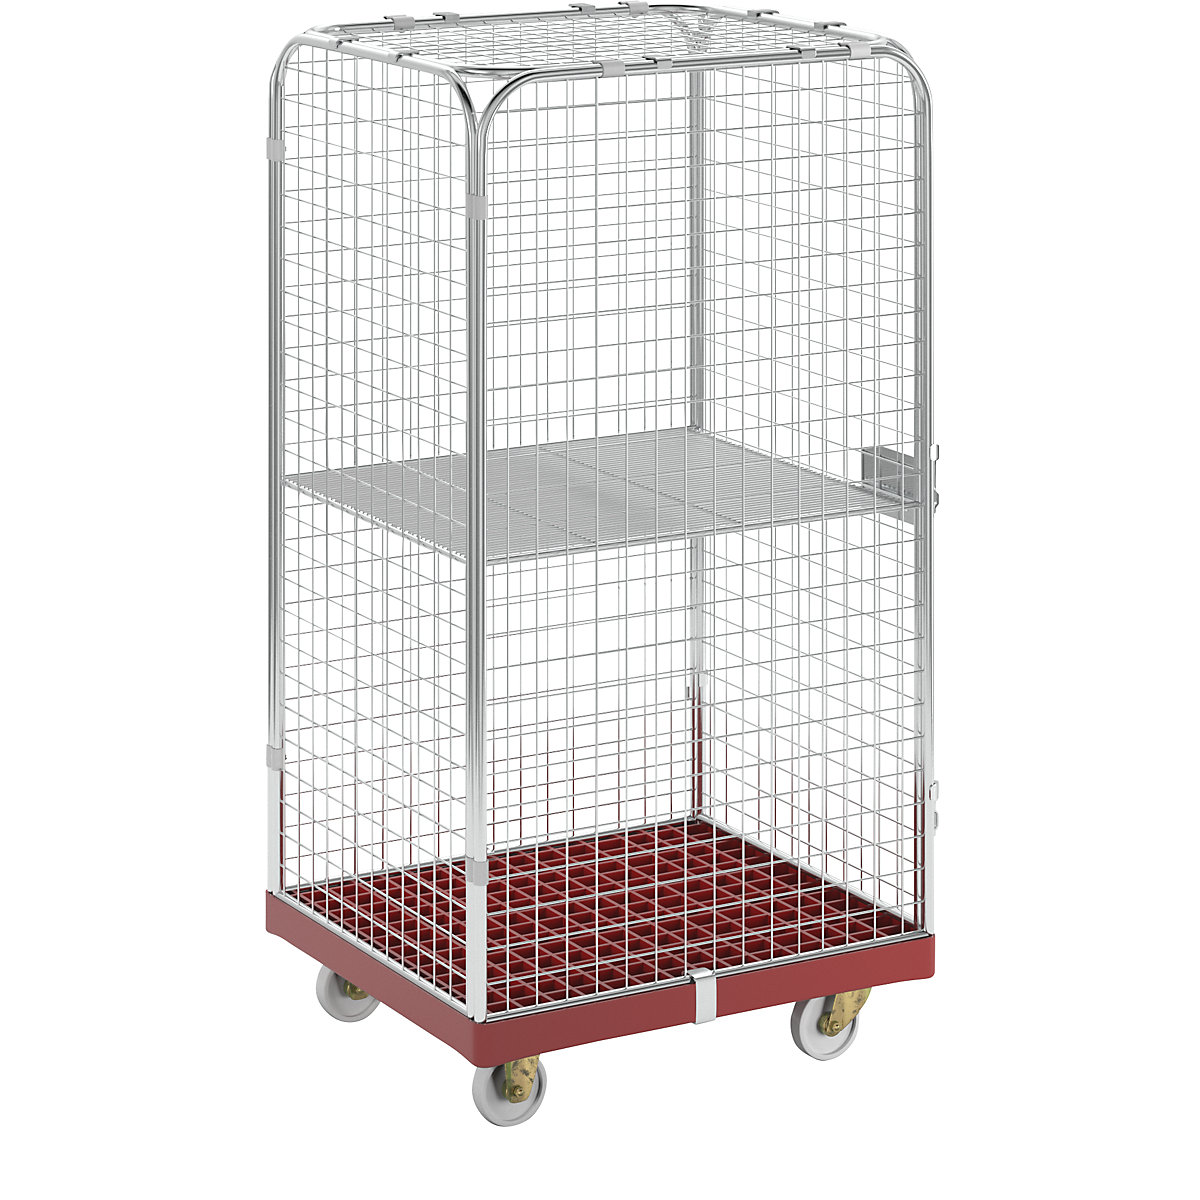 SAFE roll container, HxWxD 1550 x 720 x 810 mm, red transport dolly-10